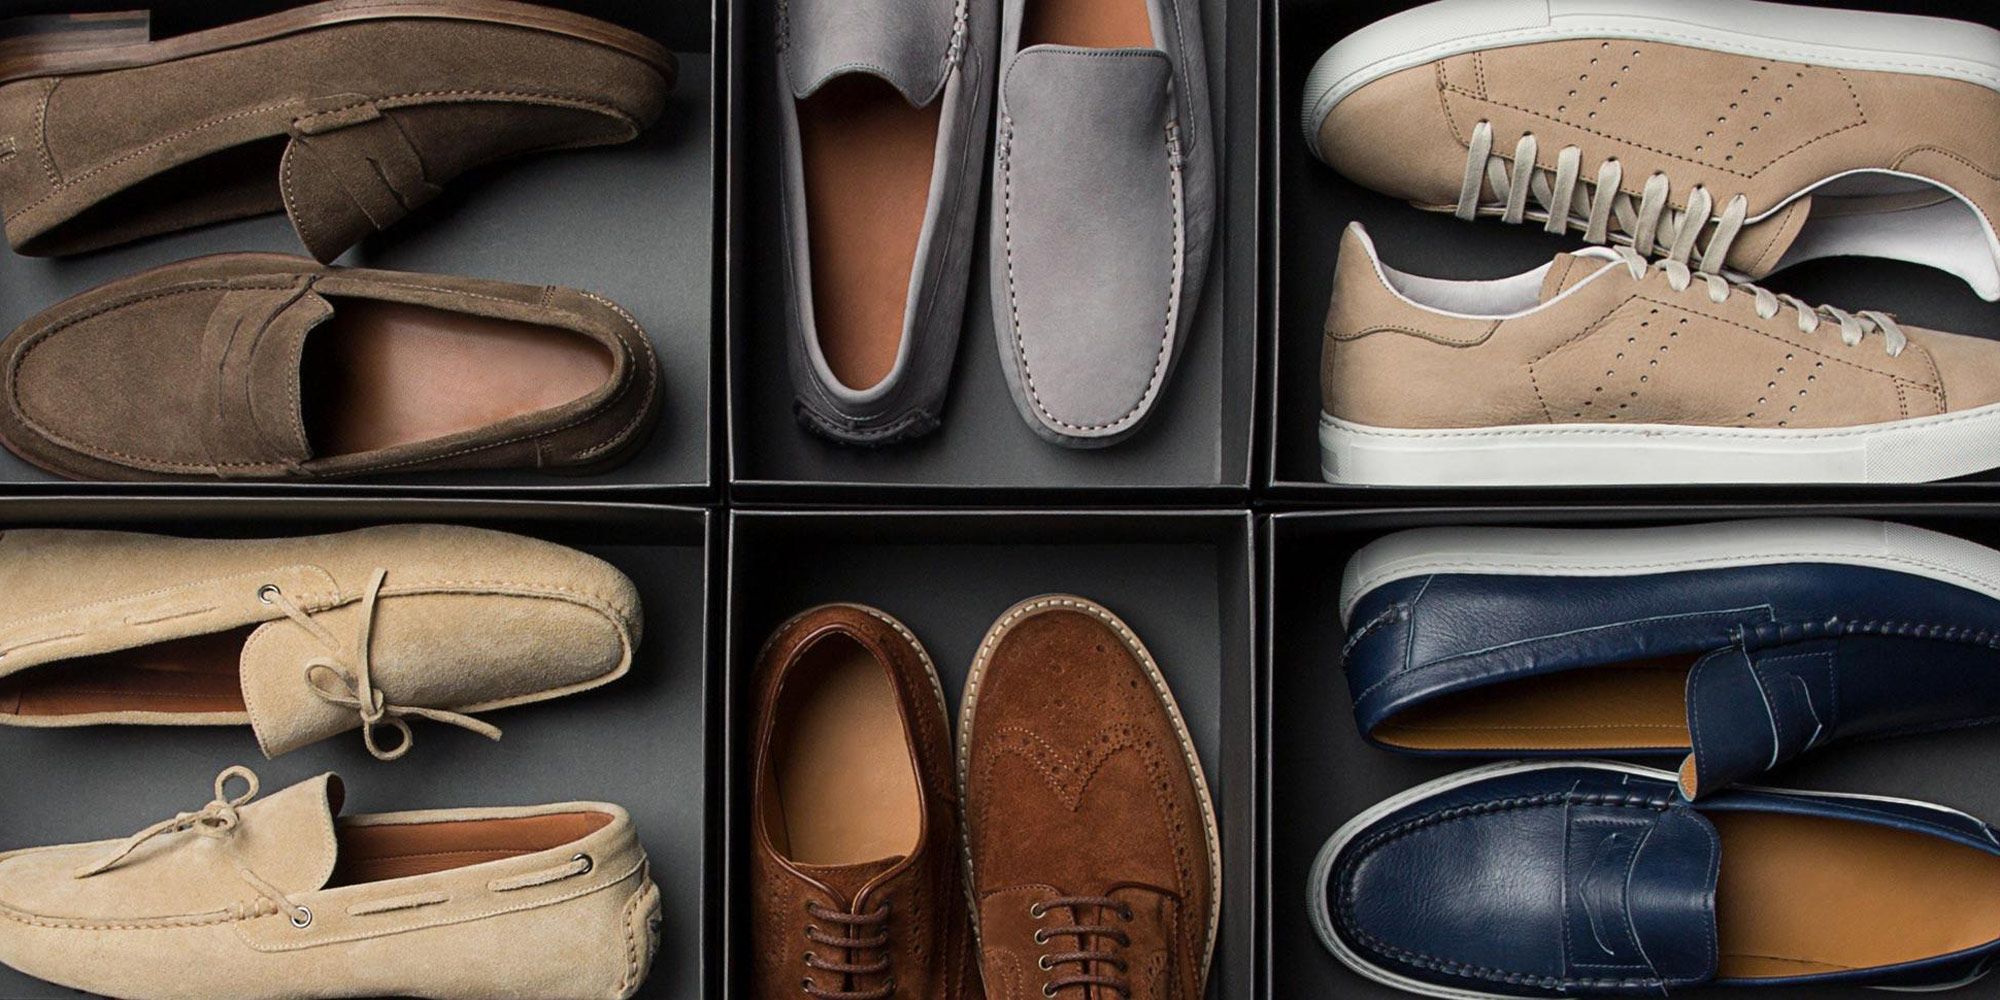 This Brand's Italian-Made Shoes Cost a Lot Less Than You'd Think